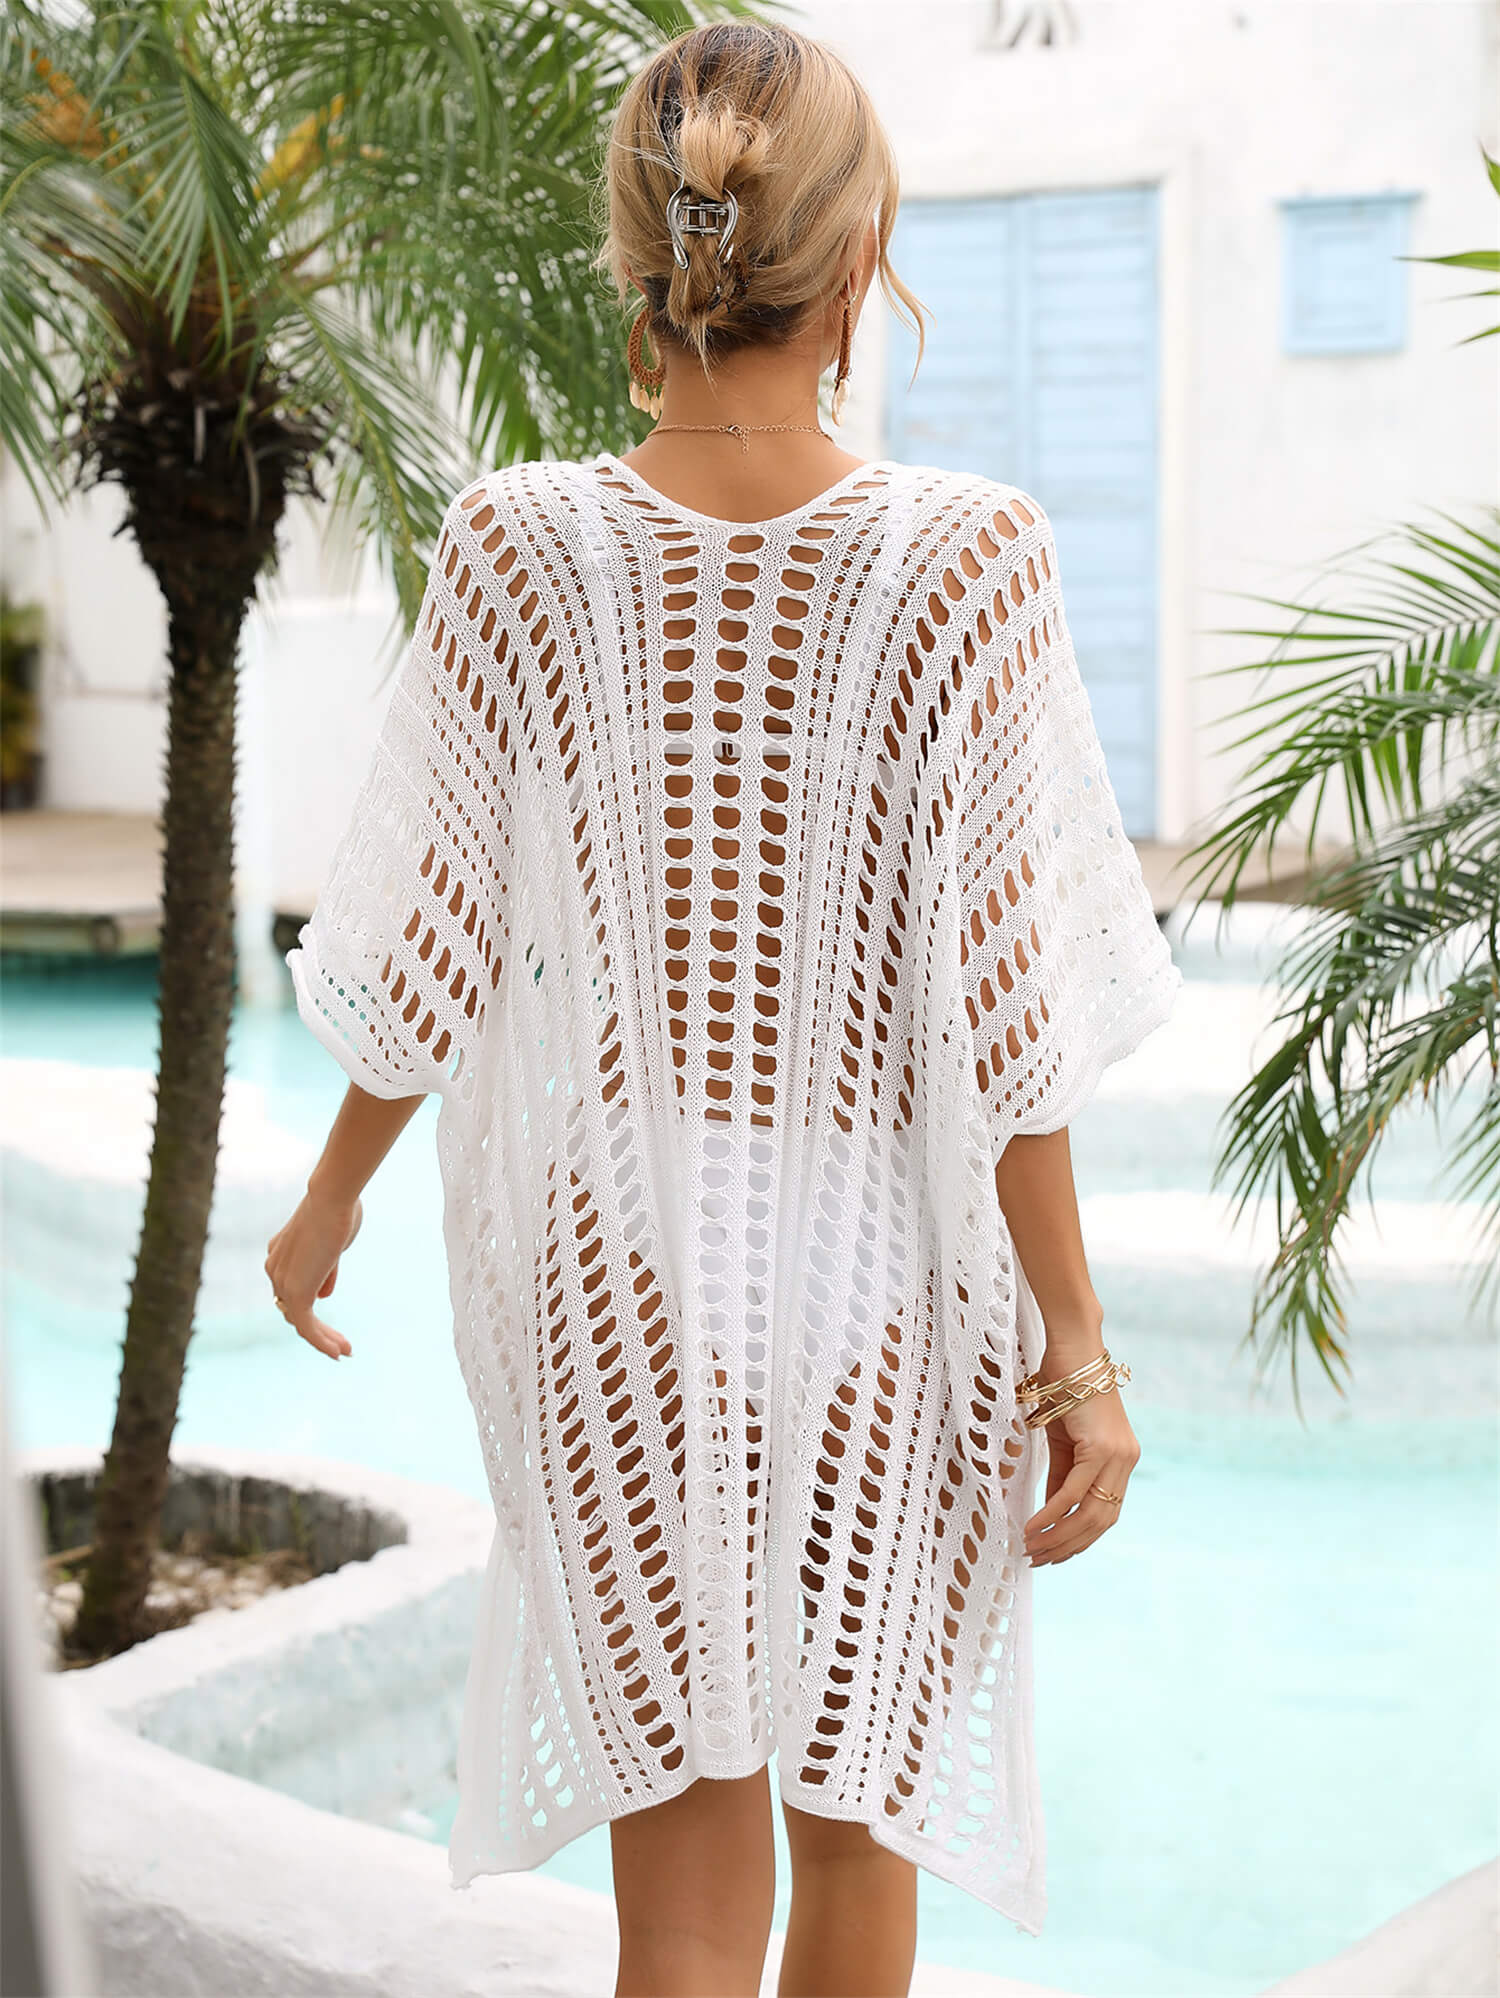 VACATION dolman cover-up - Lamoille Yoga